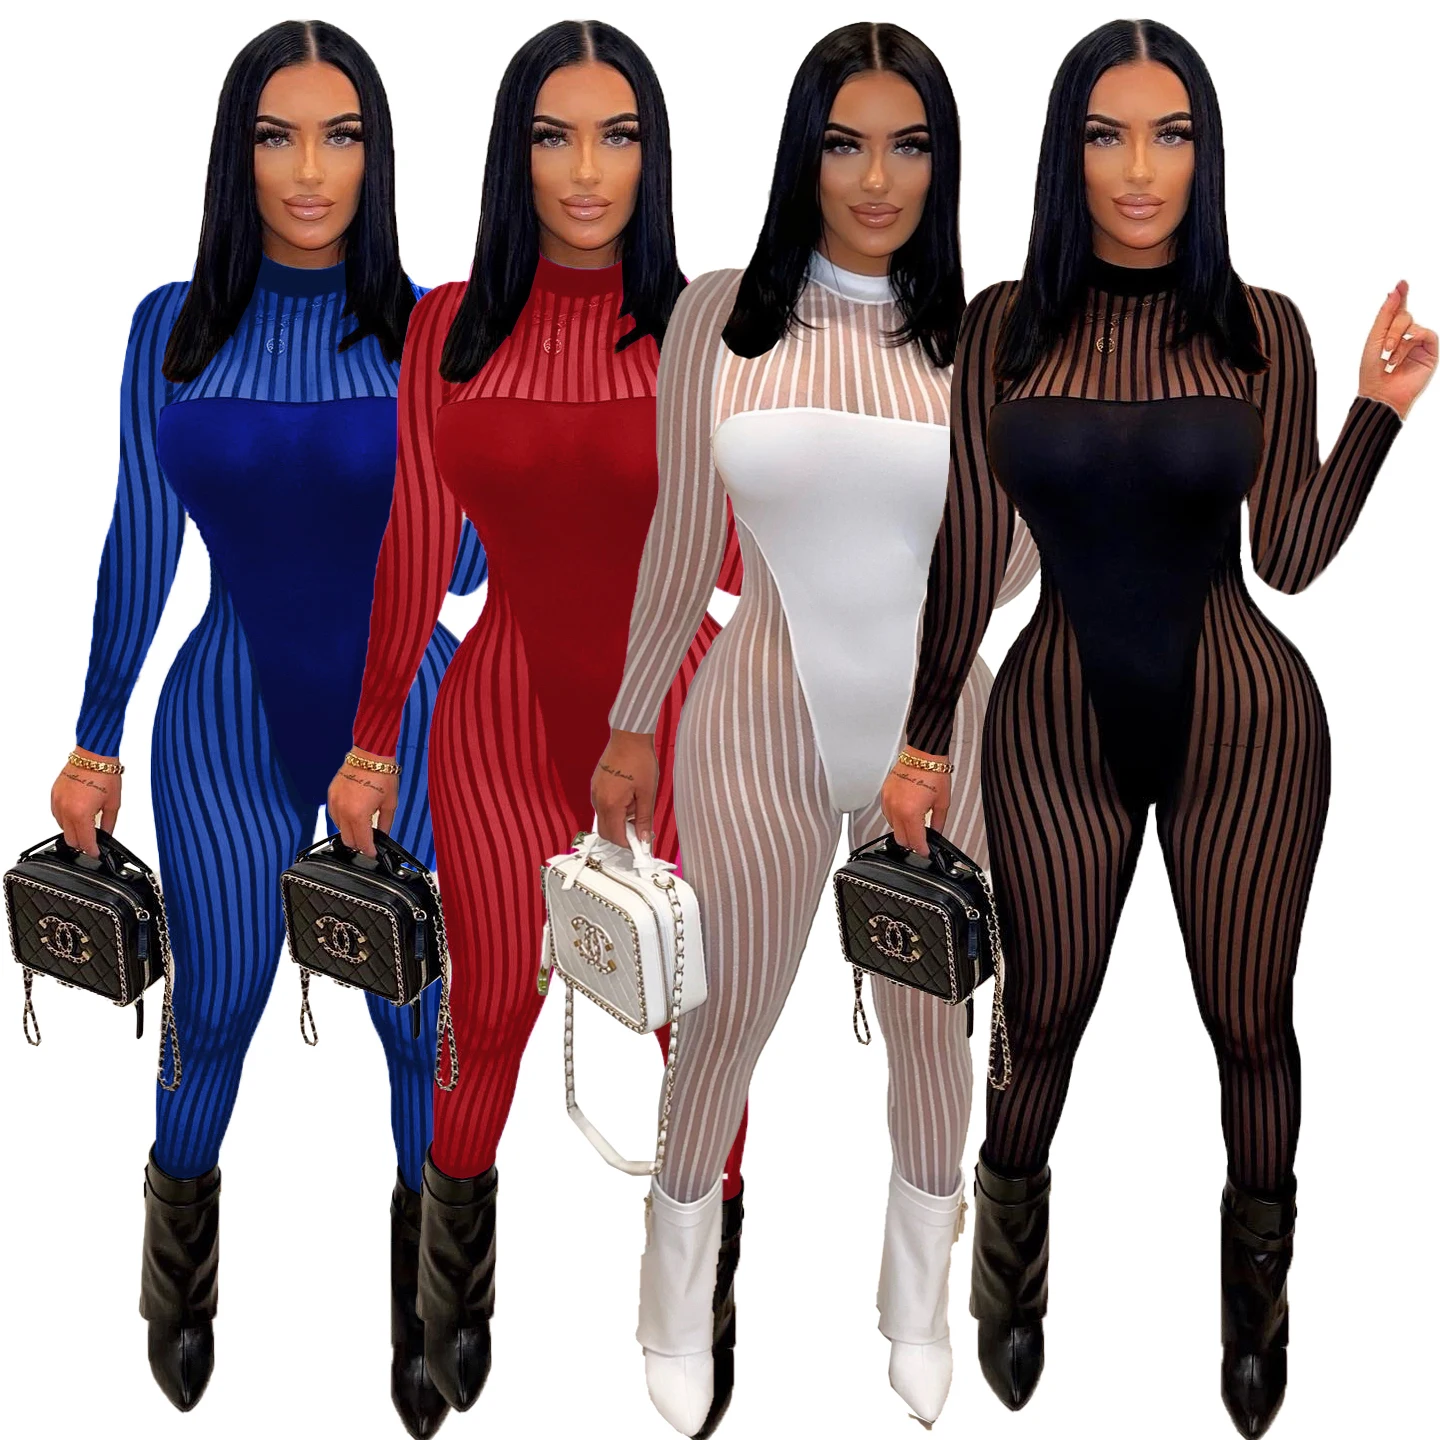 2022 Fall Sheer Mesh Patchwork Tracksuit Women Sexy O Neck Zipper Long Sleeve Leggings Jumpsuits Skinny Club Party Jogger Outfit